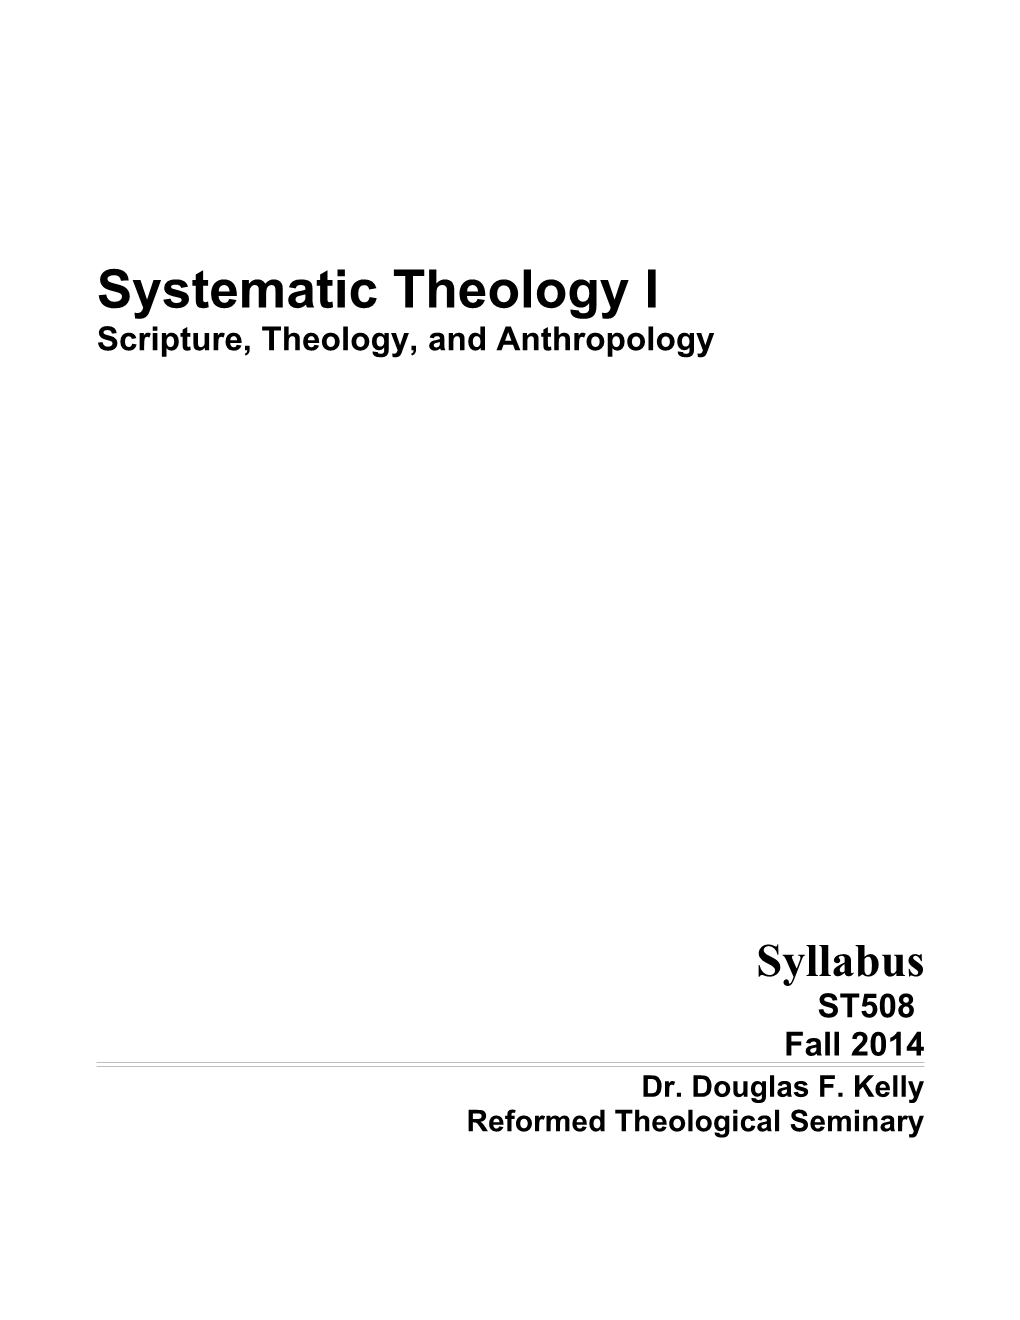 Scripture, Theology, and Anthropology